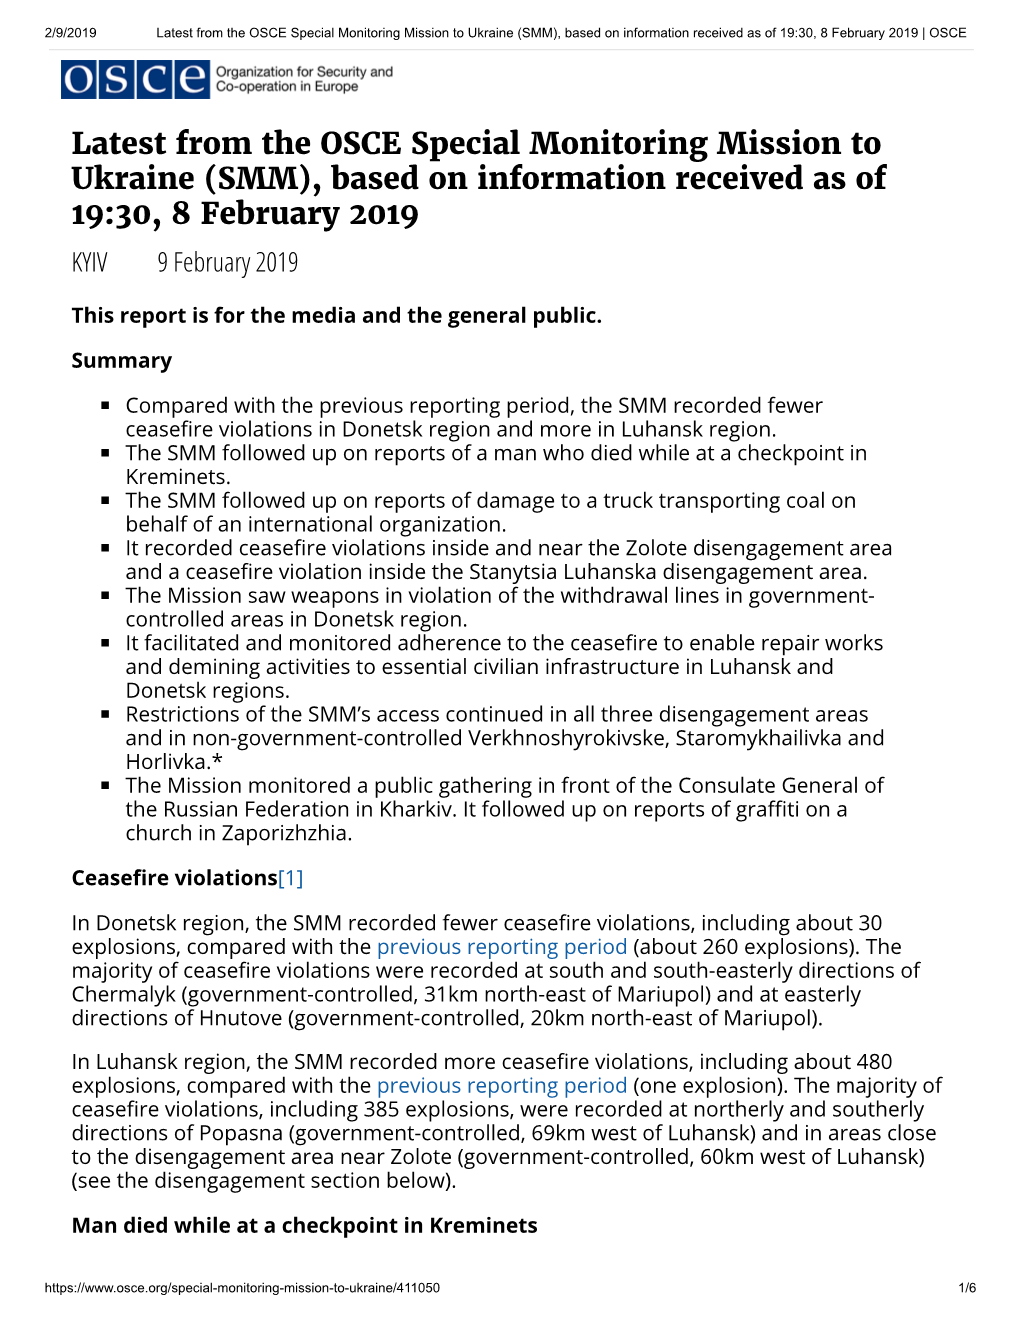 Latest from the OSCE Special Monitoring Mission to Ukraine (SMM), Based on Information Received As of 19:30, 8 February 2019 | OSCE